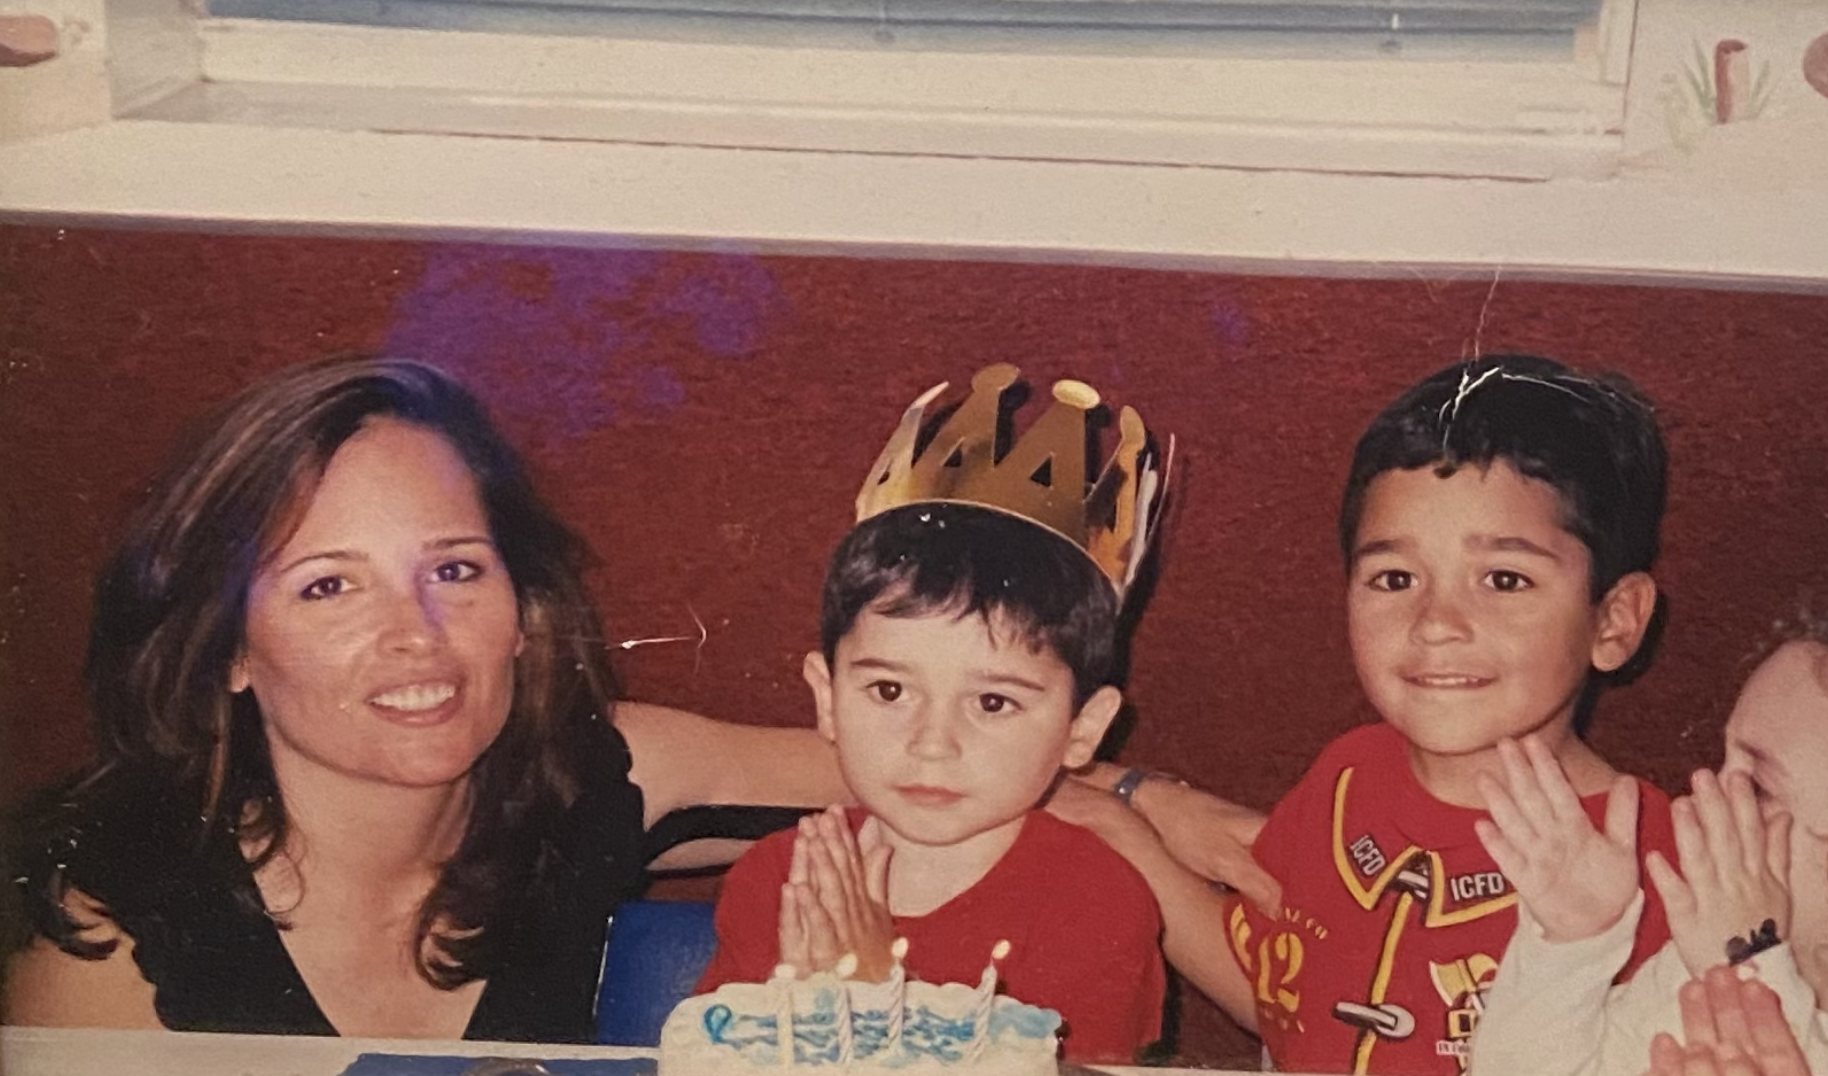 A mother sits with her two young boys, the boy at center wearing a birthday a paper crown and a lit birthday cake in front of him, and the boy at right wearing a fire-fighter costume